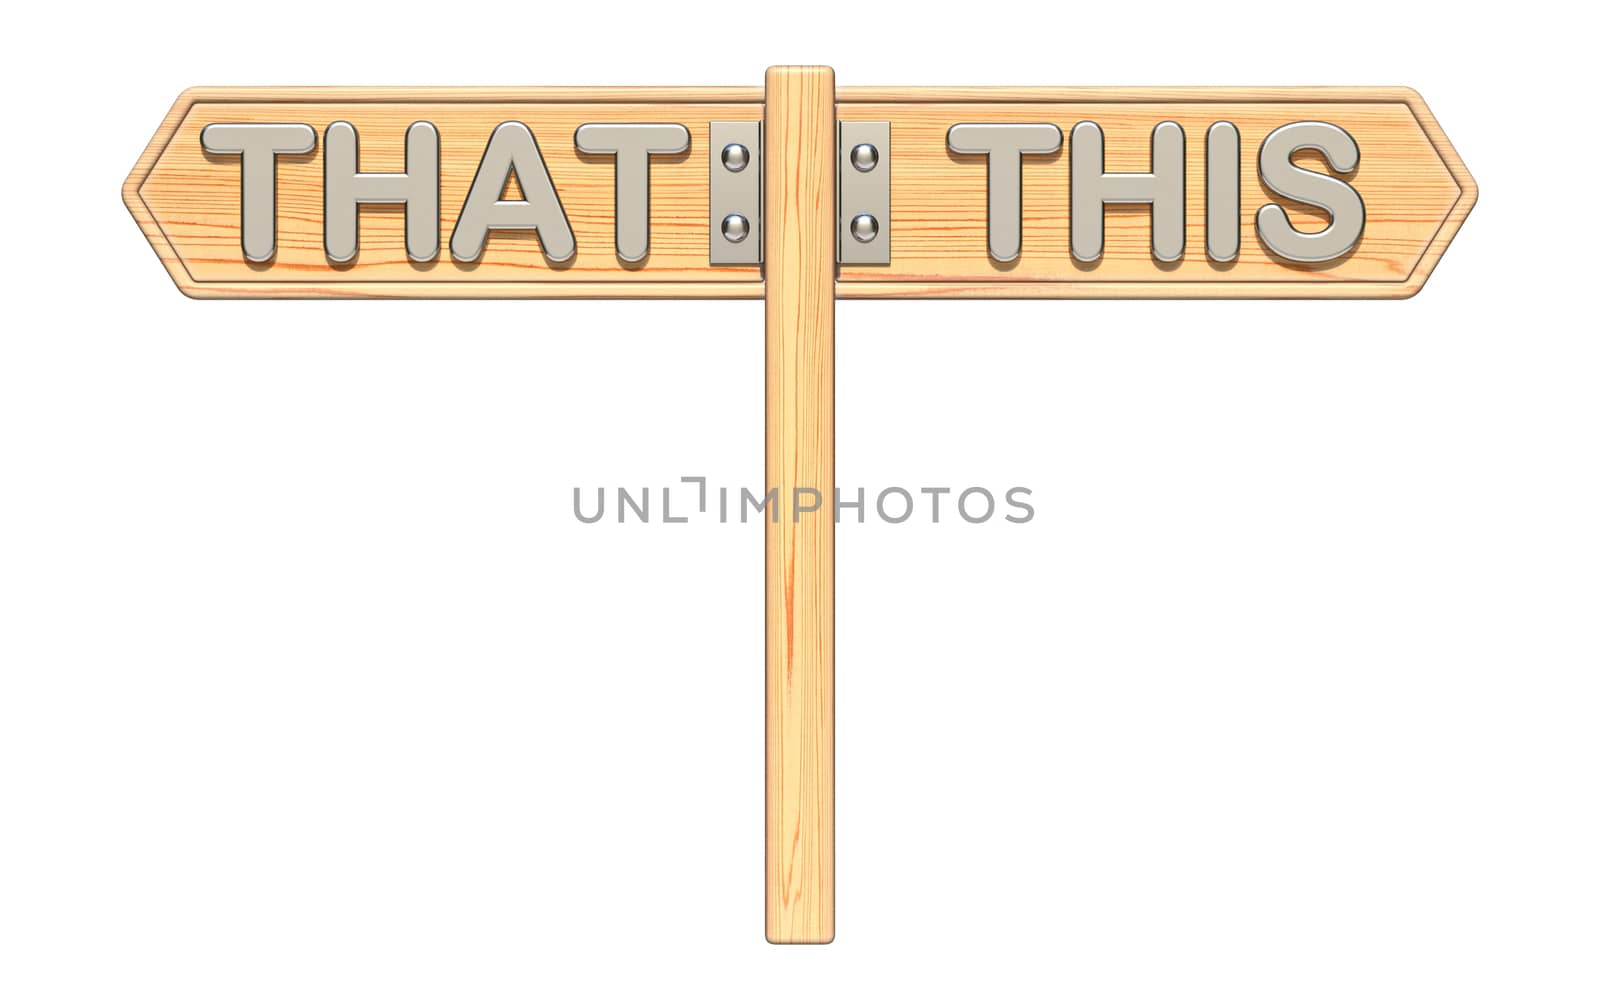 THAT and THIS wooden sign 3D render illustration isolated on white background